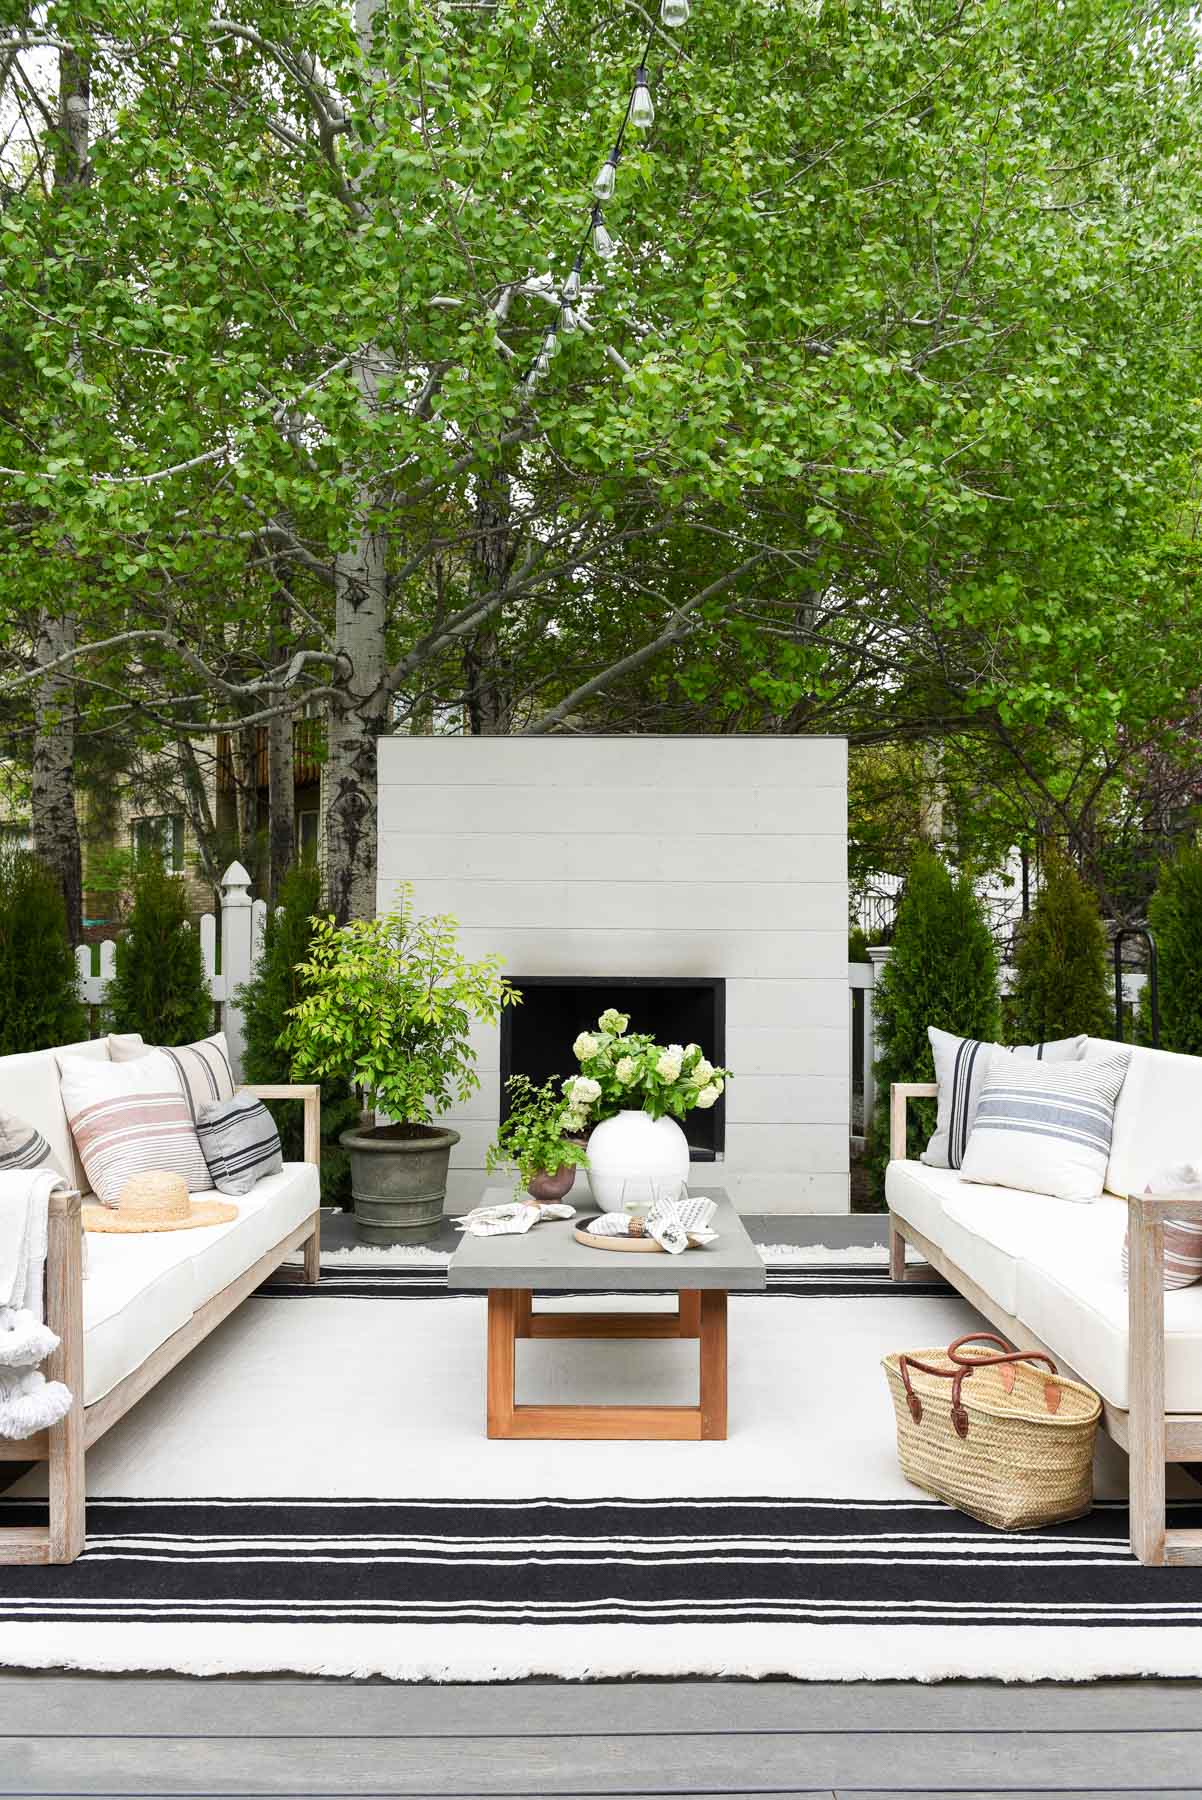 upholstered seating in a wood frame in front of a fireplace on a deck